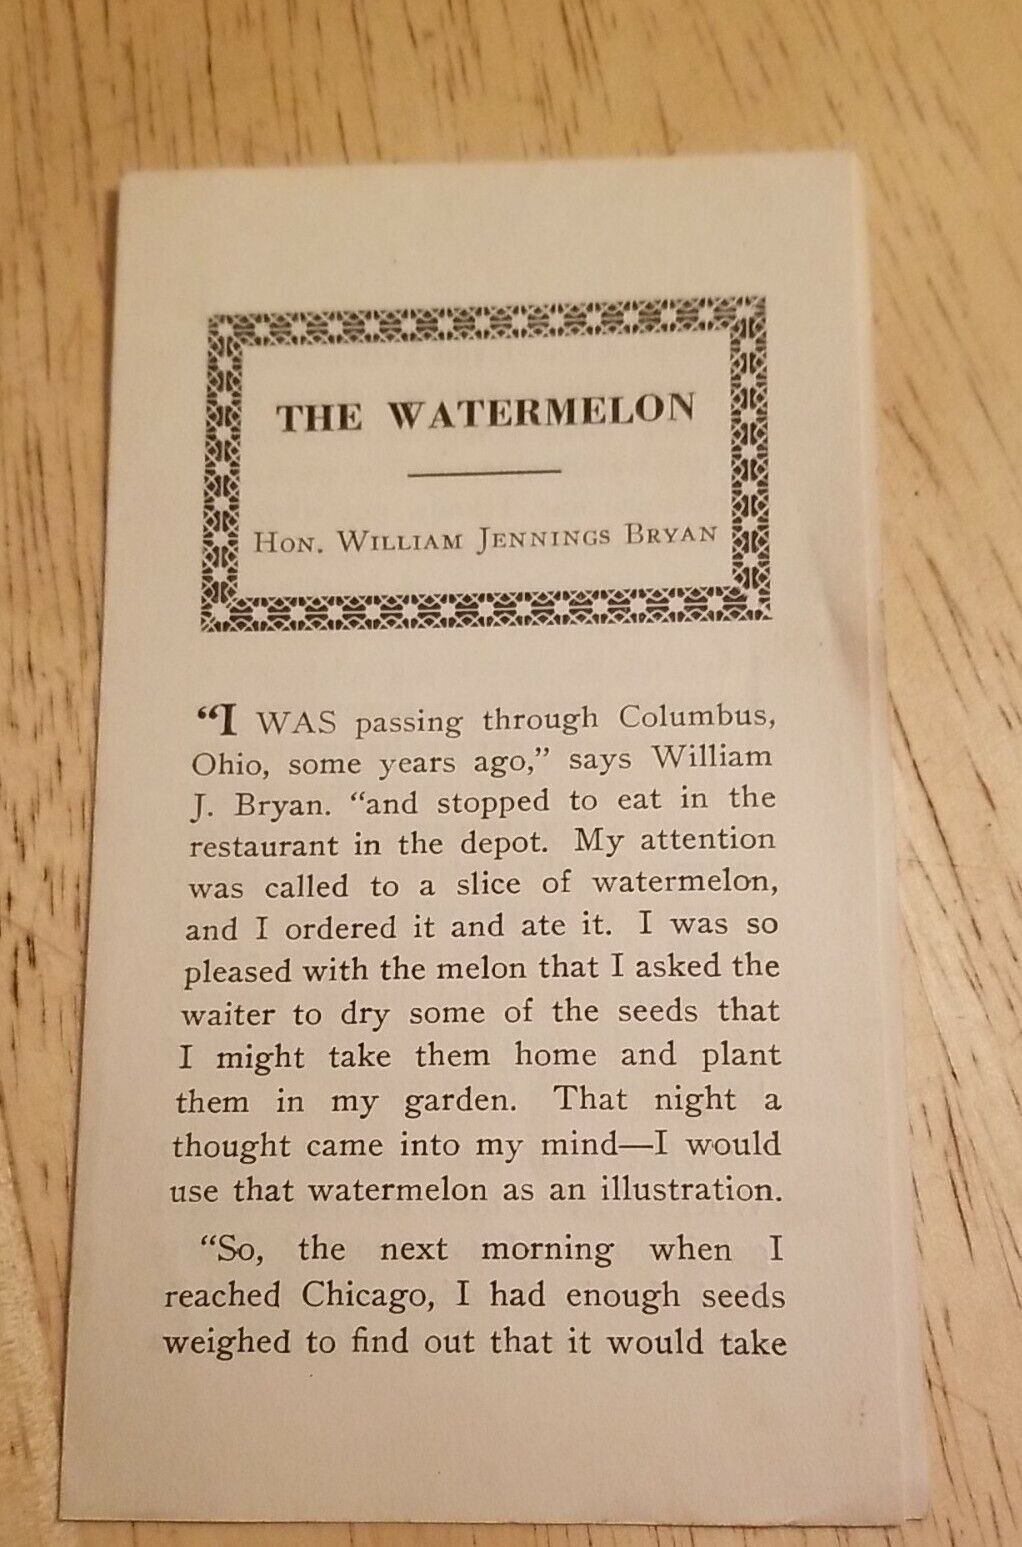 Old brochure The Watermelon Hon. William Jennings Bryan American Tract Society